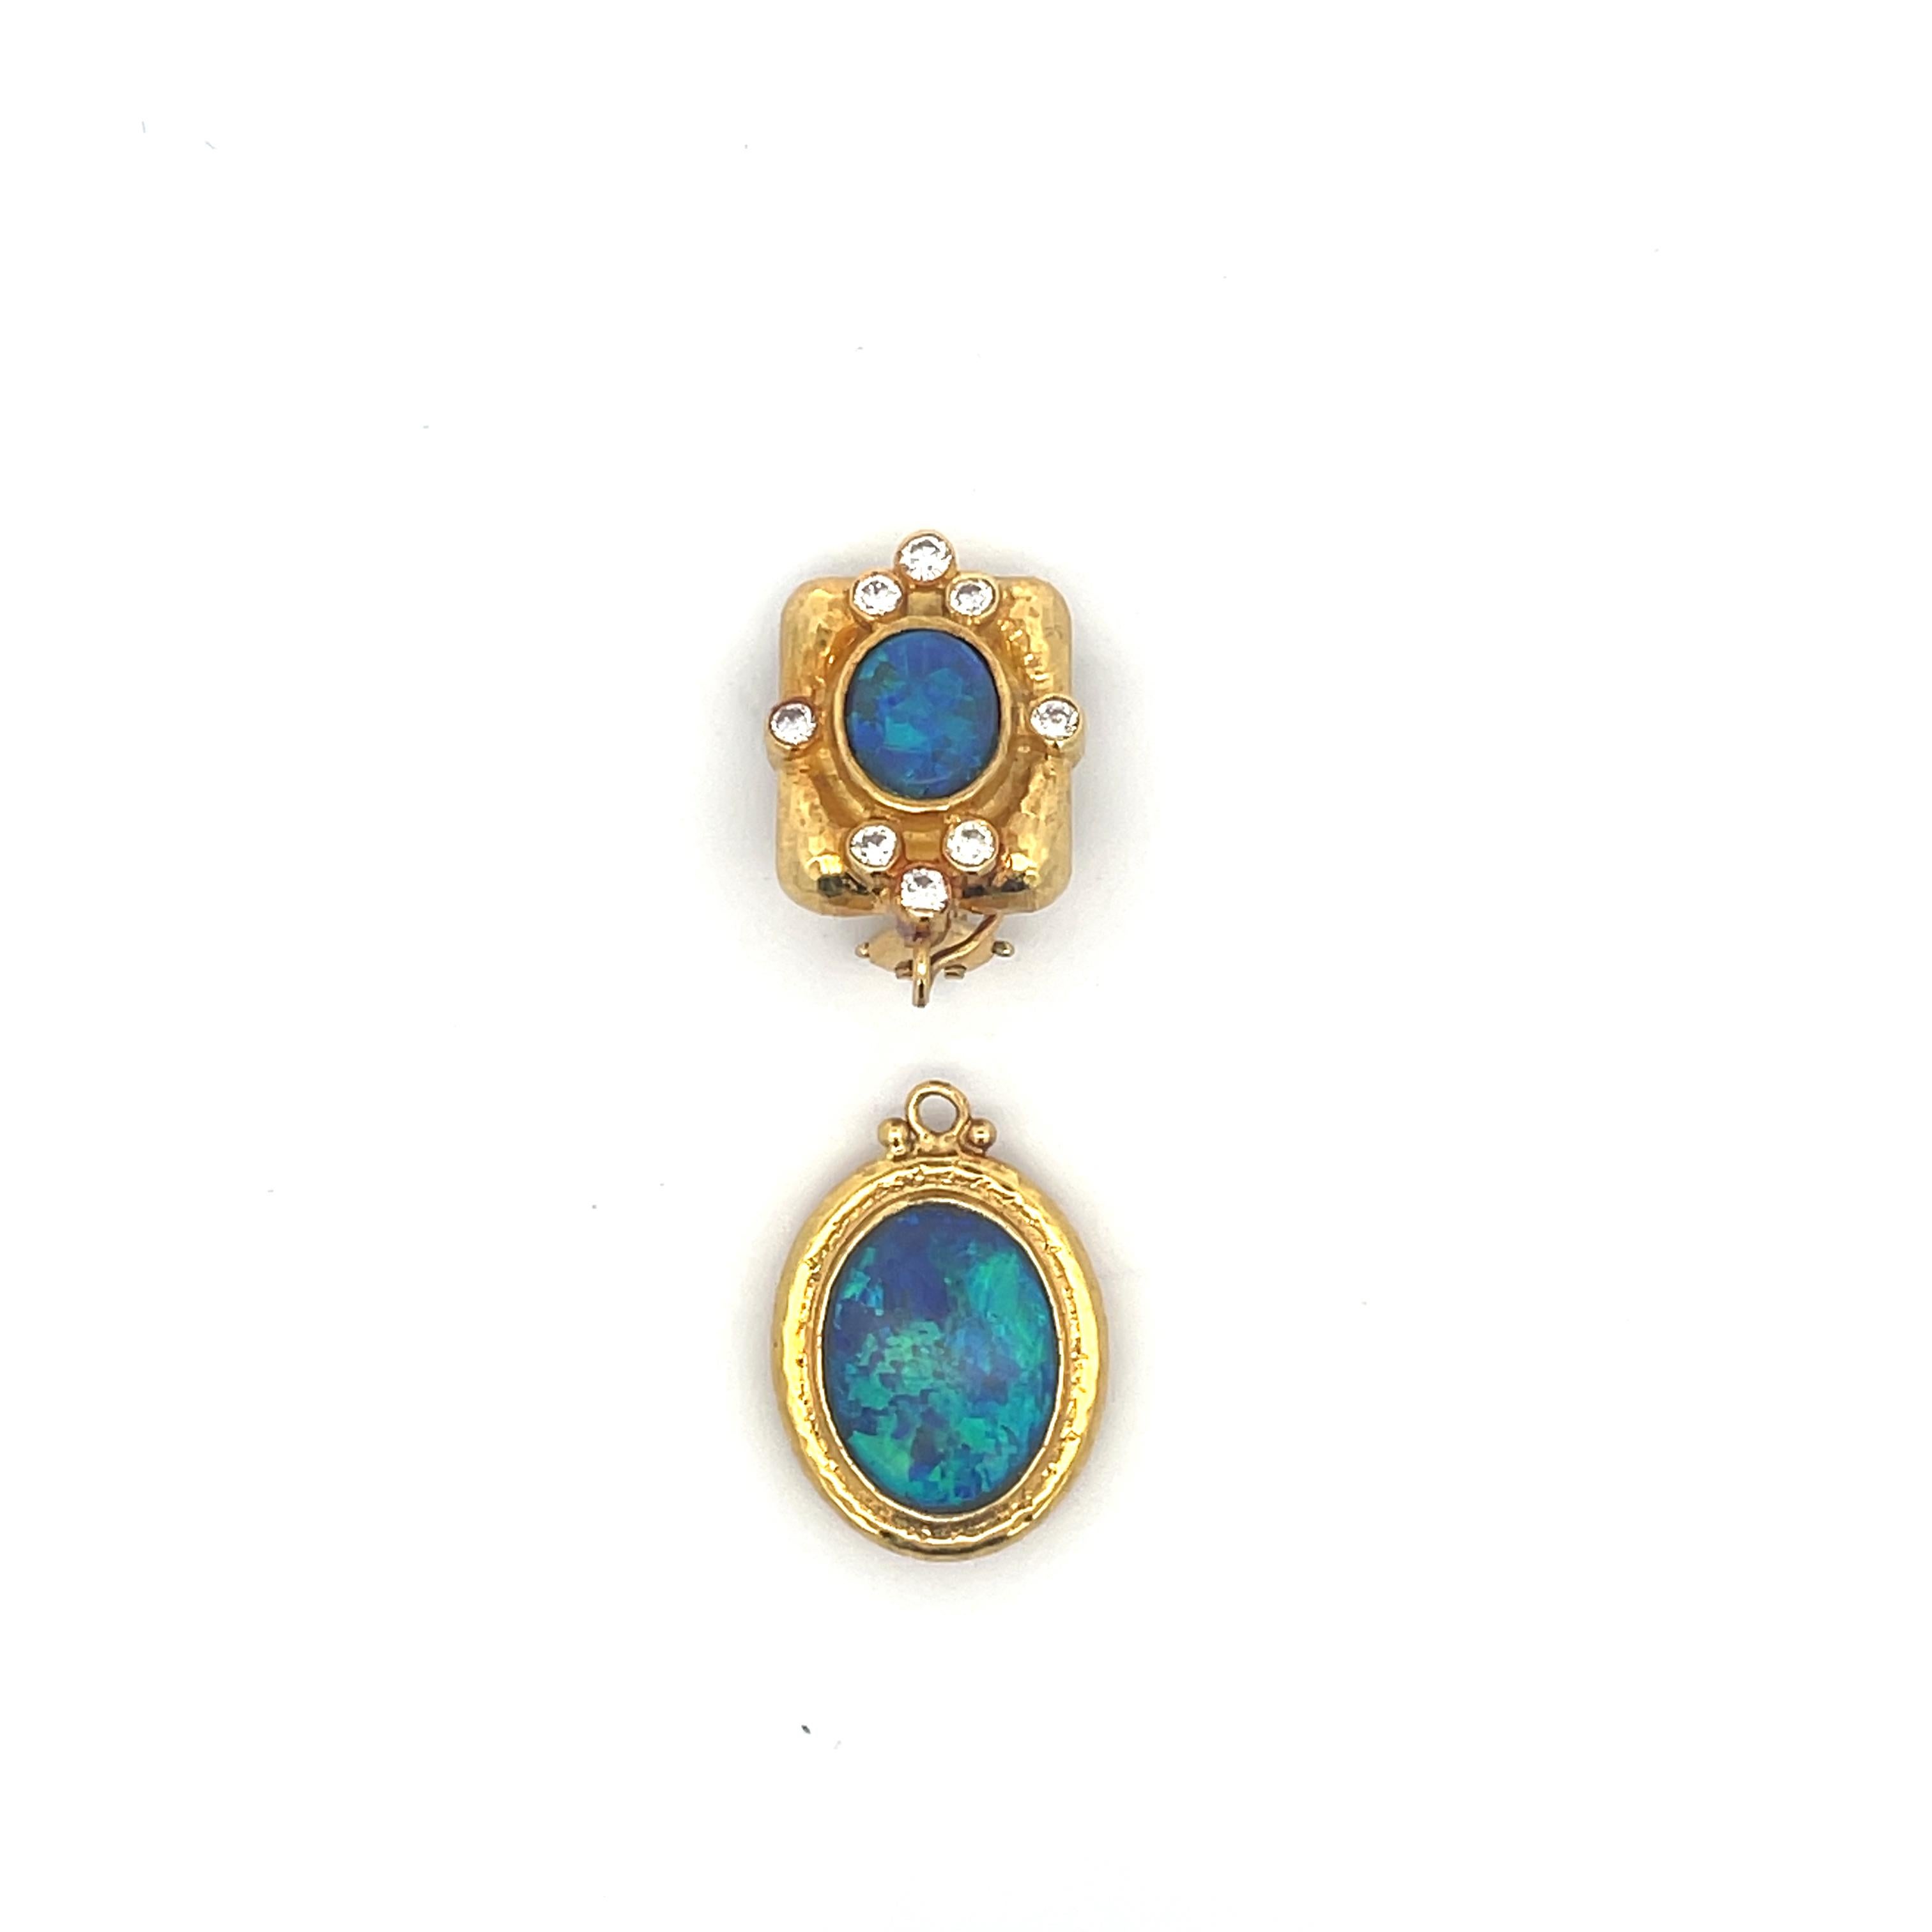 Opal and Diamond Earrings in 22K Yellow Gold by Nerson. The earrings feature approximately 8ctw of opals and 16 round diamonds. The drop on the earring can be removed. 
23 Grams
1.5